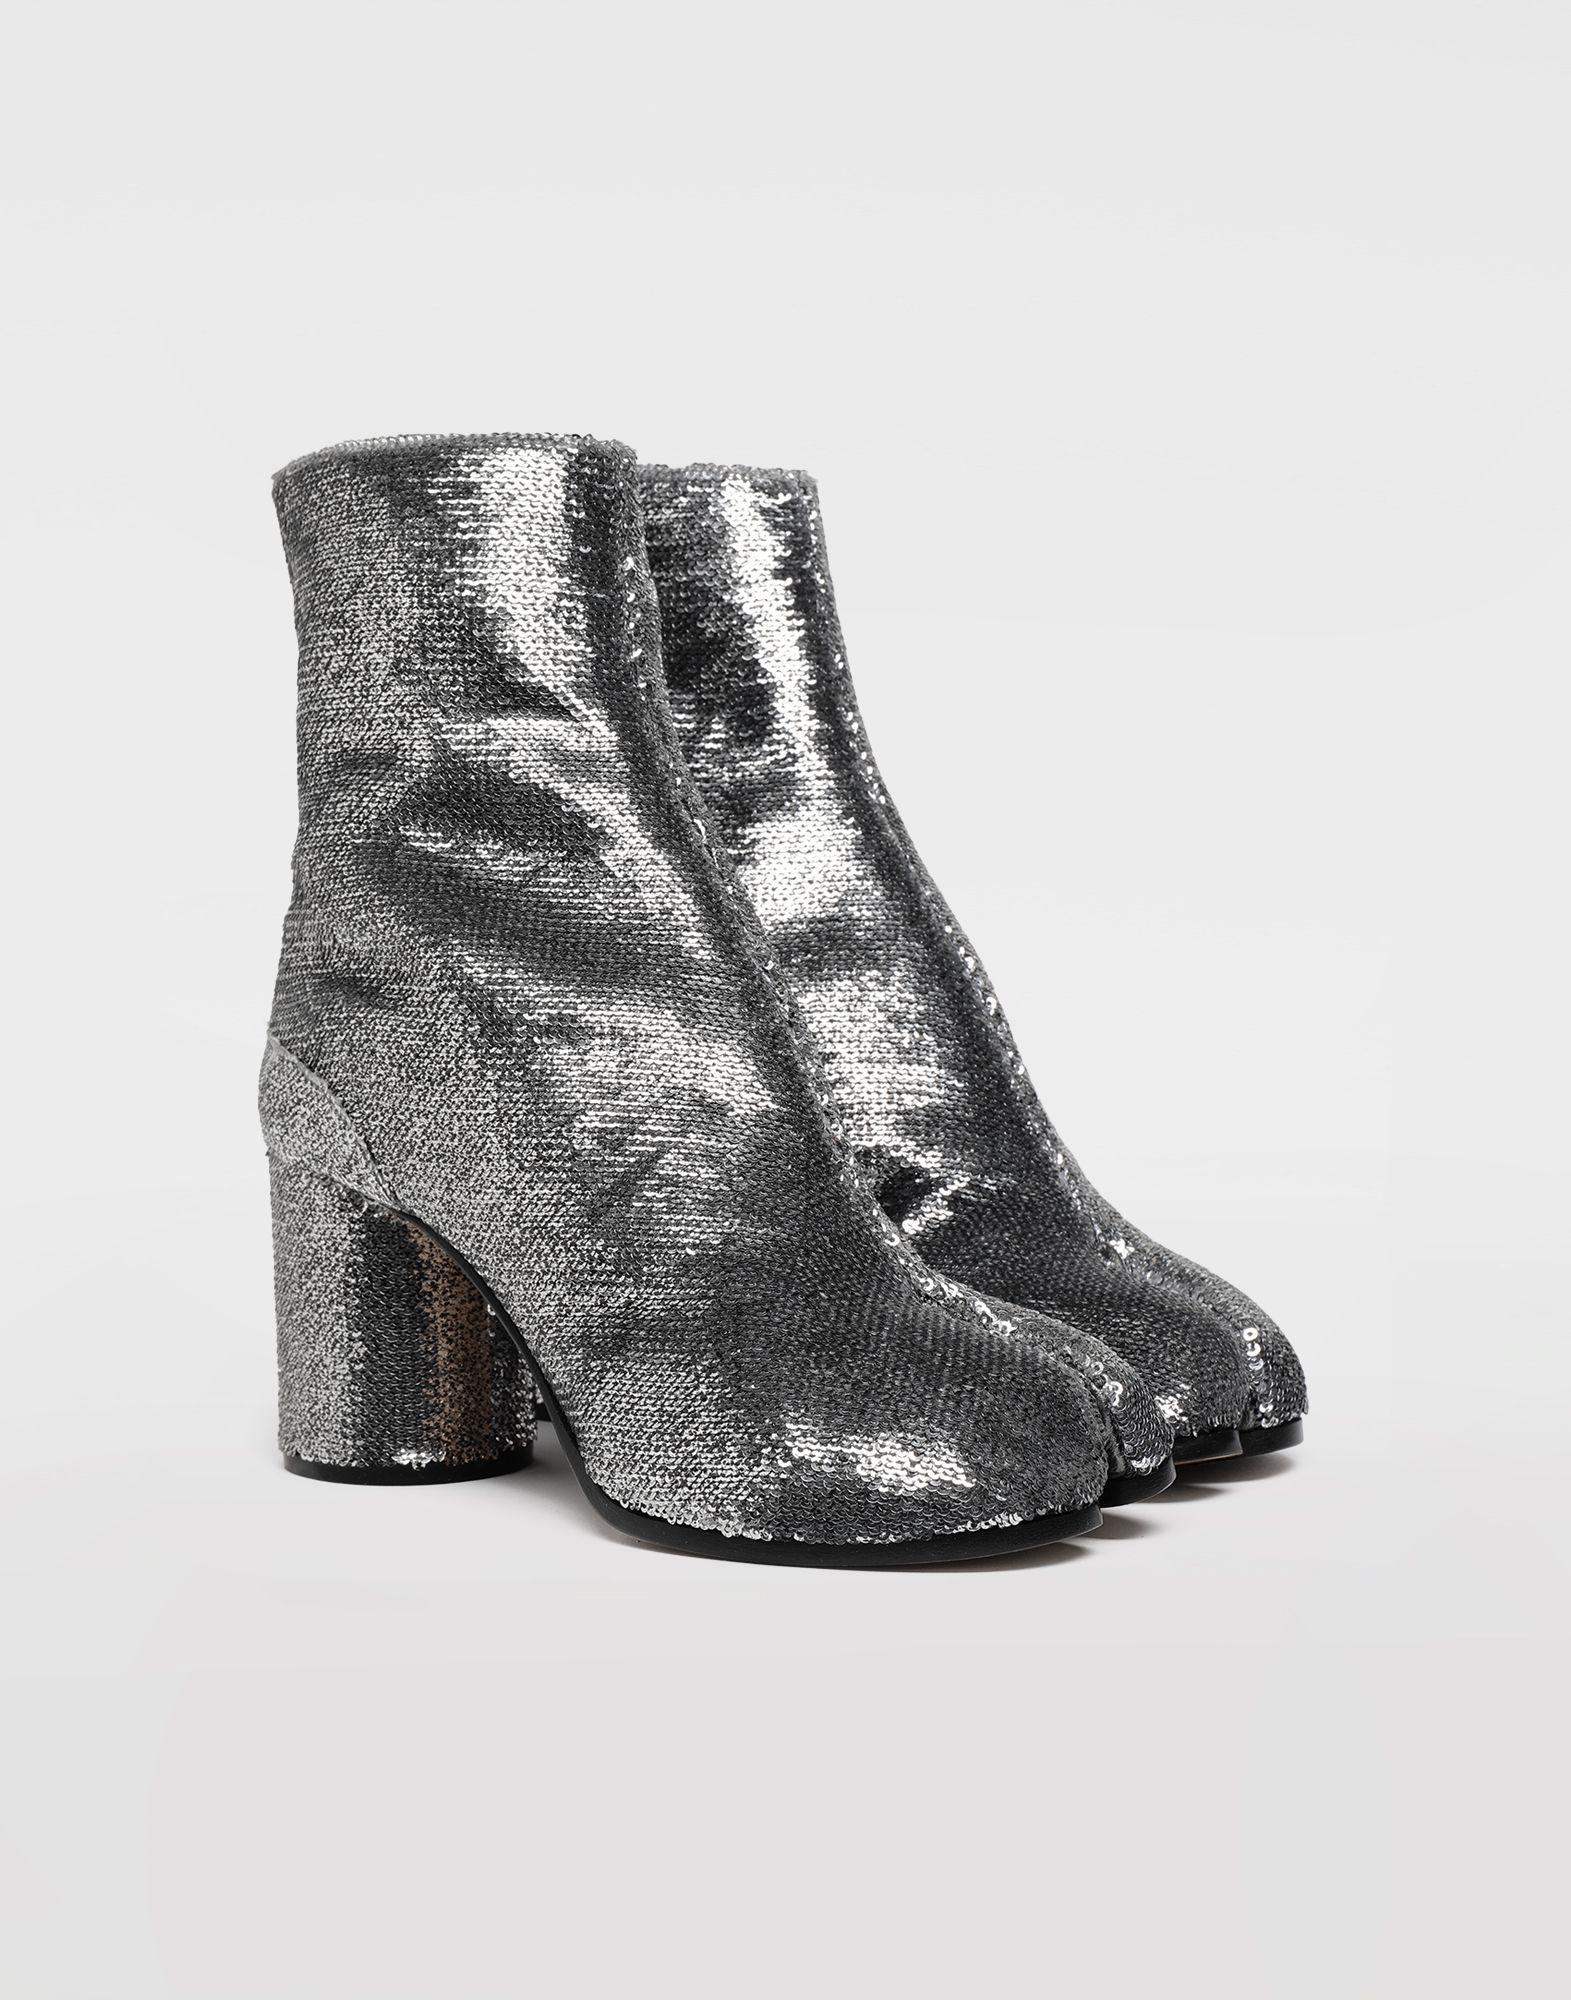 Maison Margiela Classic Tabi Ankle Boot Silver Sequin in Metallic - Lyst